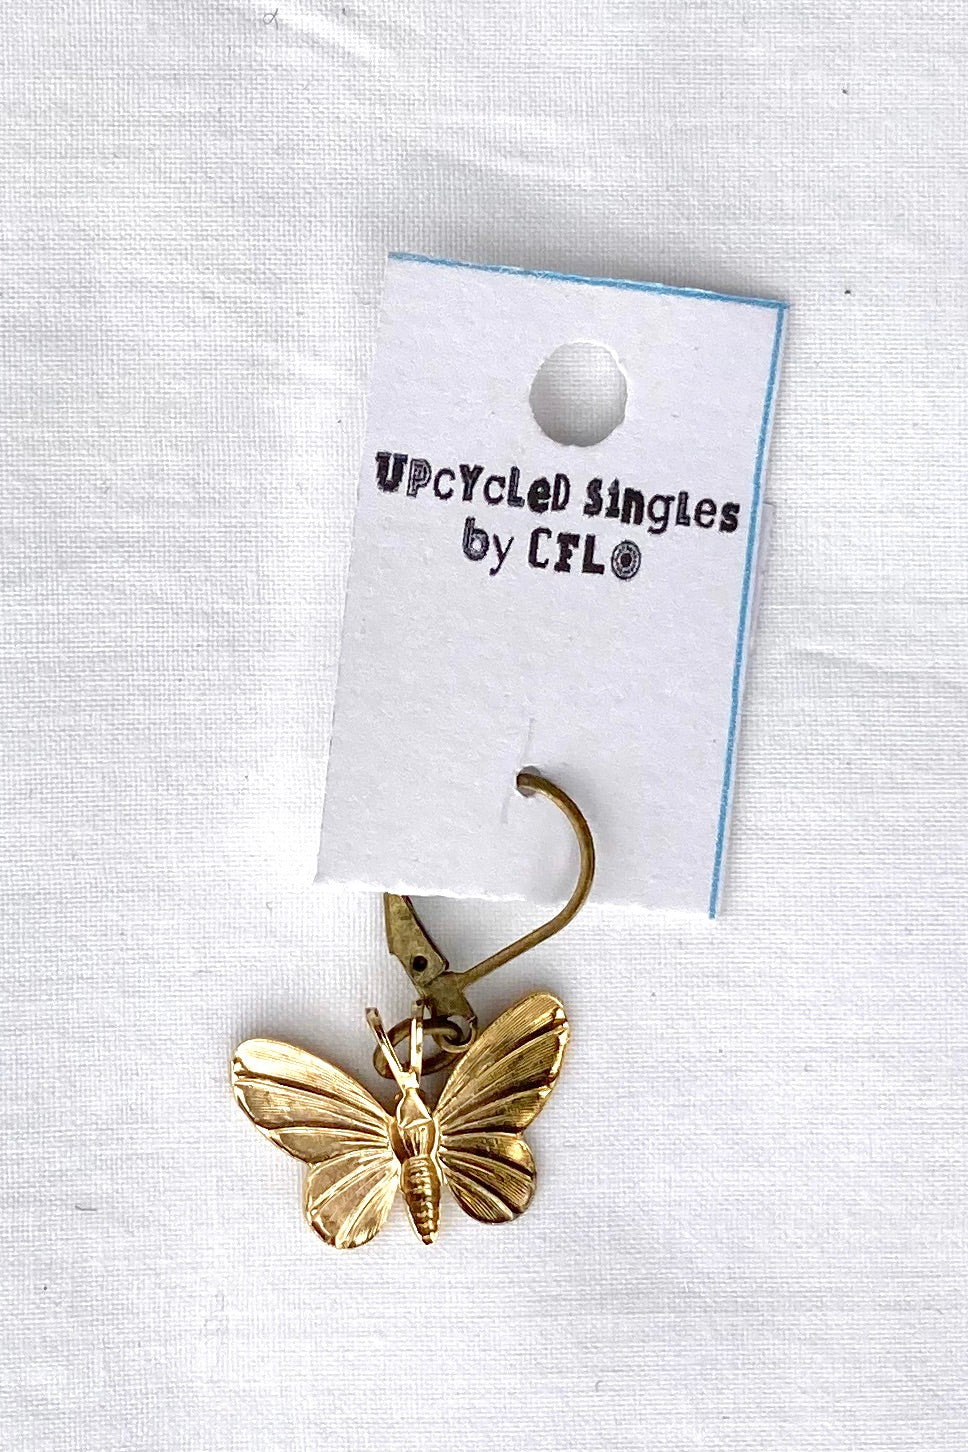 Upcycled Singles! Gold Butterfly! Vintage Charms For Your Ears!